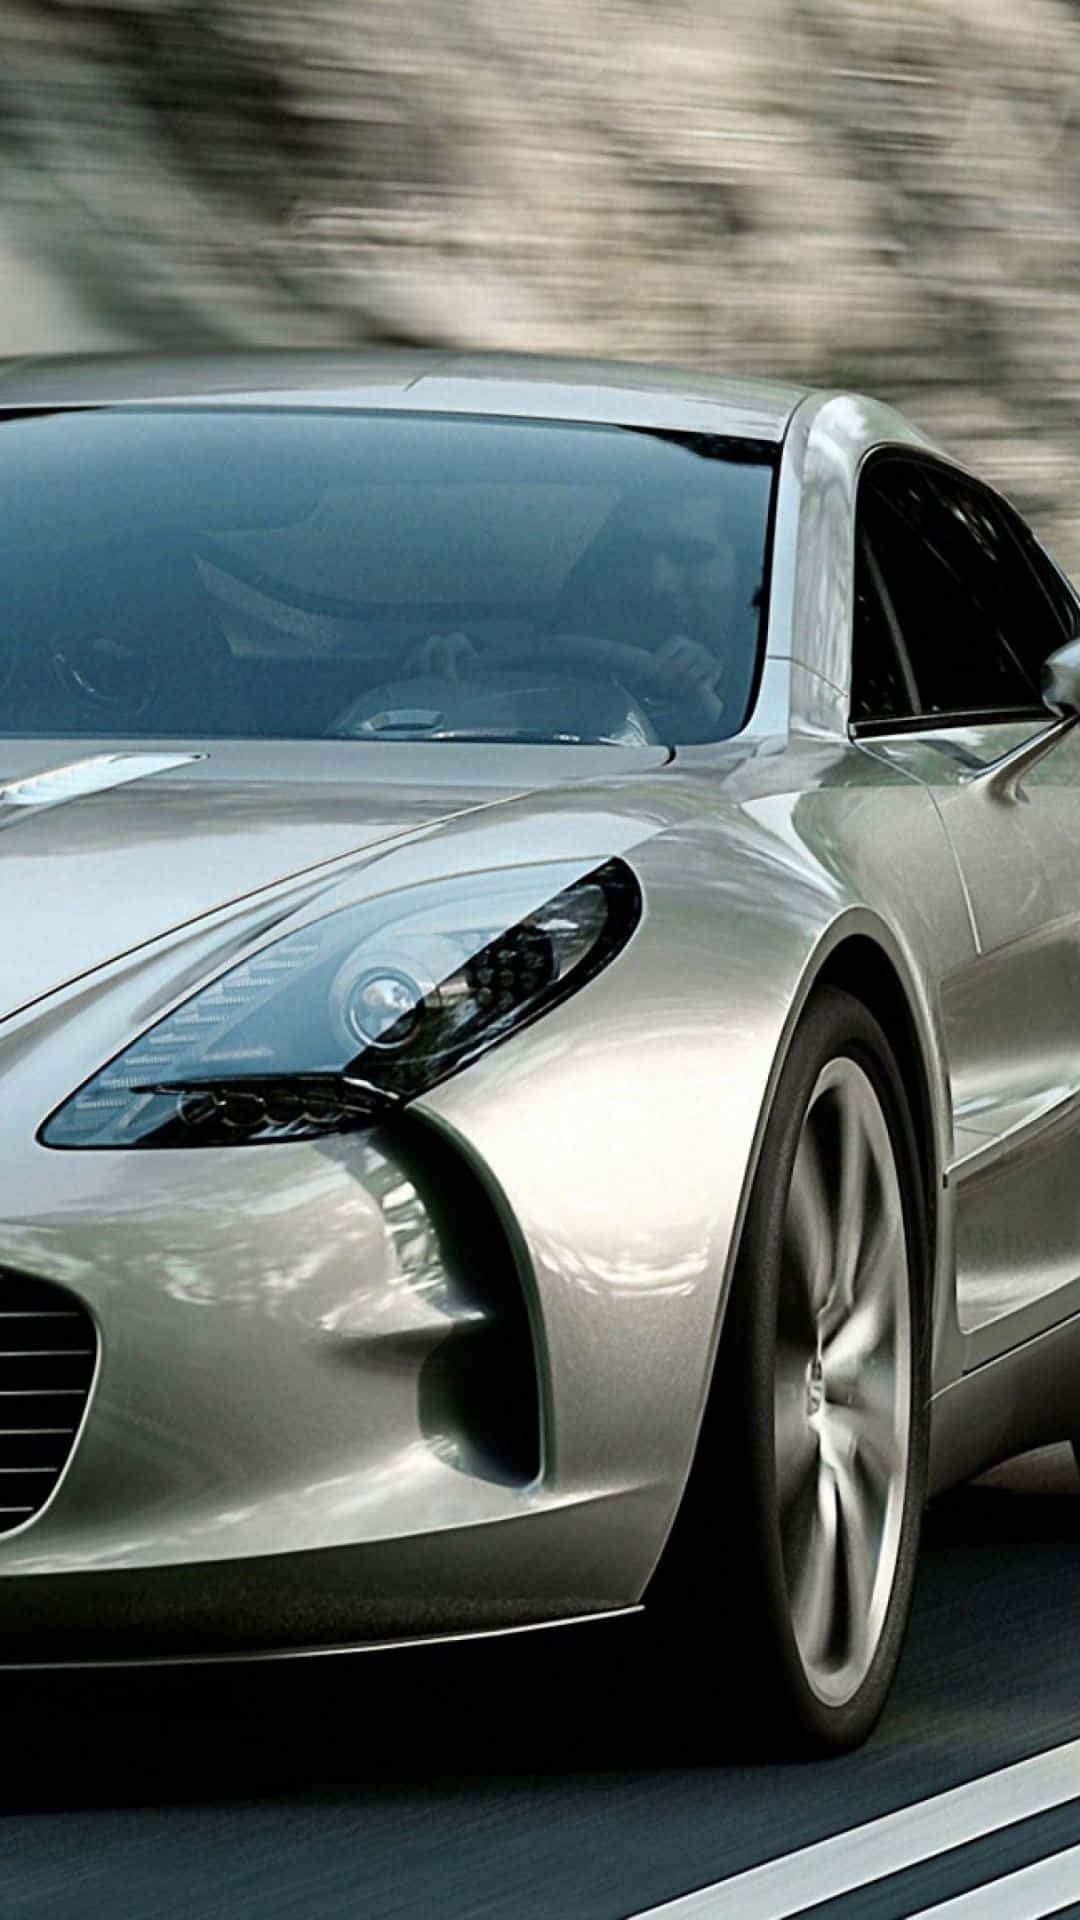 The Sleek and Exclusive Aston Martin One-77 Wallpaper